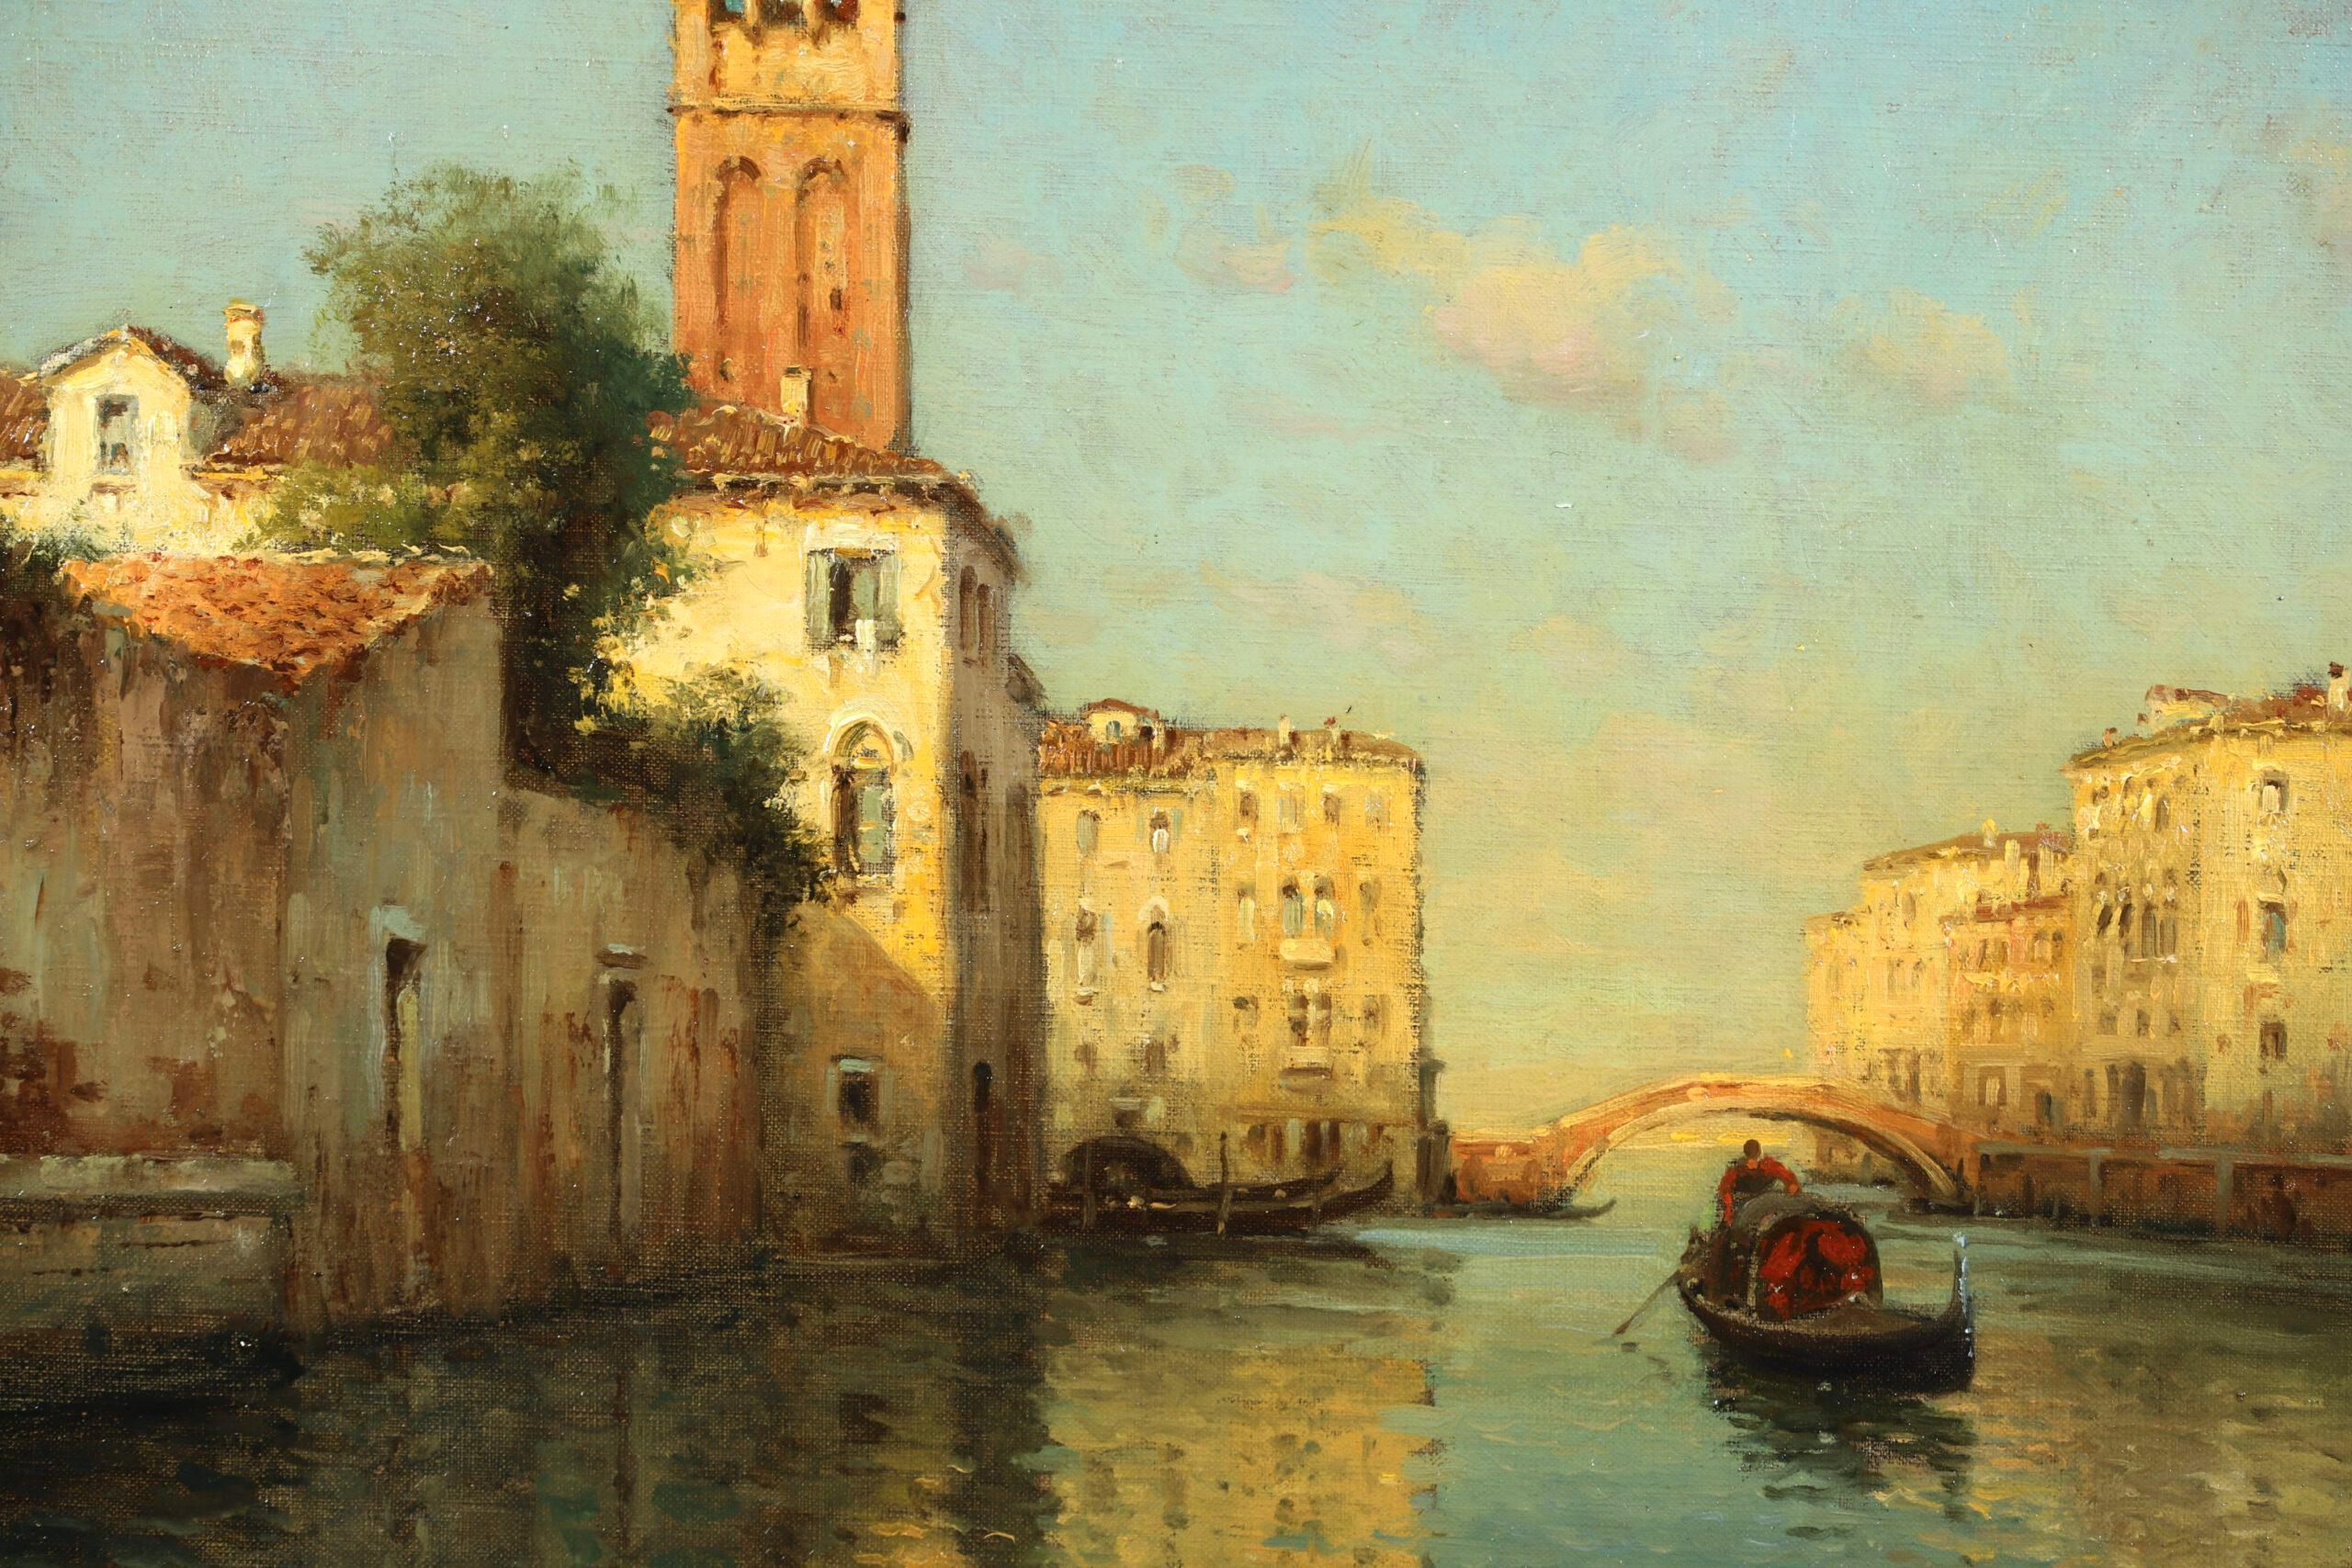 Gondolier on a Canal - Impressionist Landscape Oil Painting by Antoine Bouvard For Sale 3